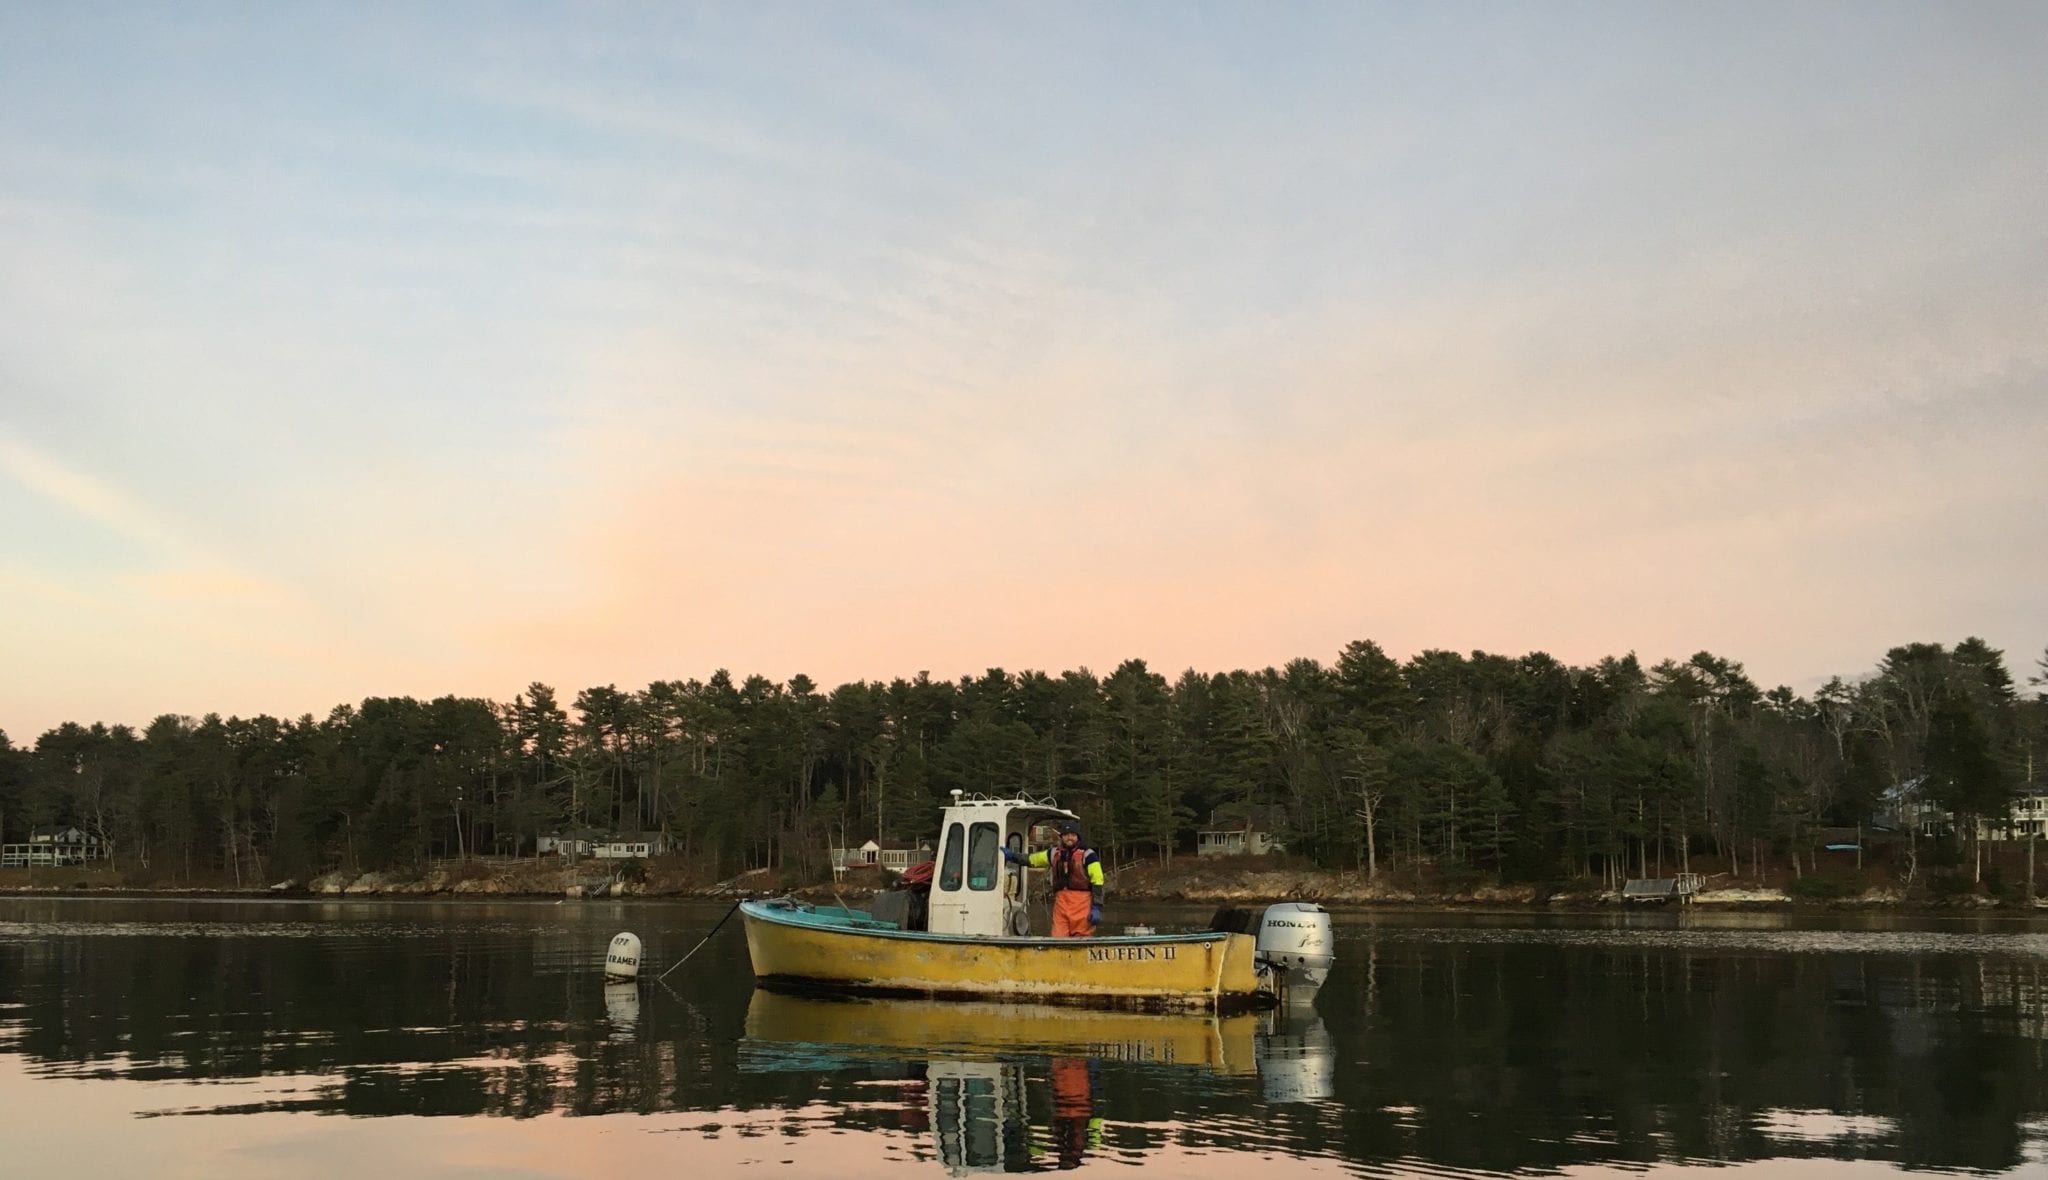 Winnegance Oyster boat at sunset in Maine